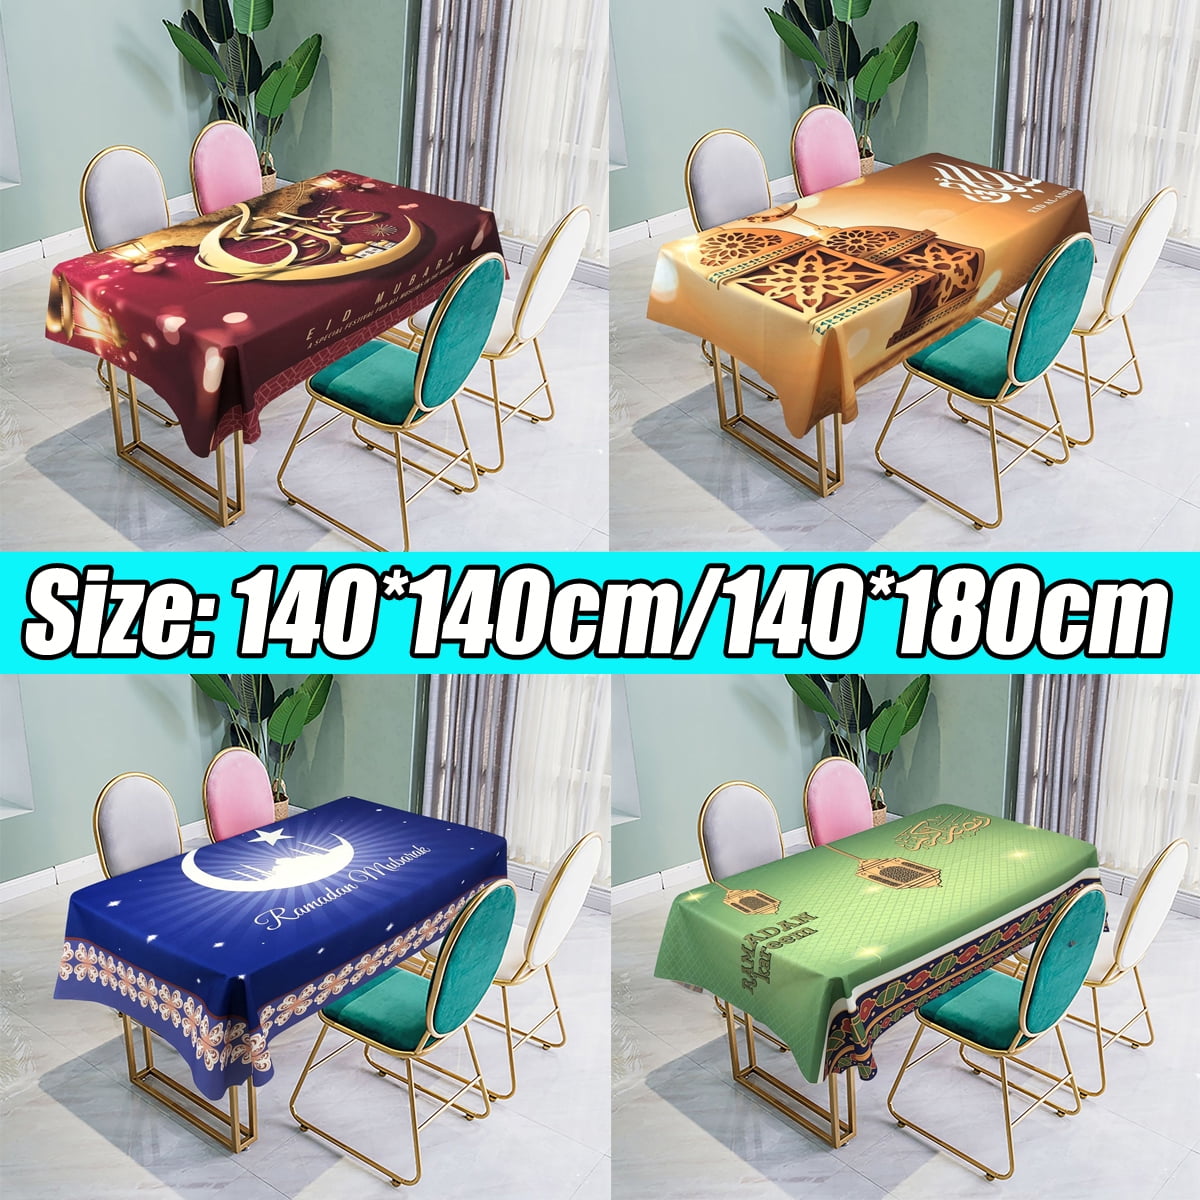 Oil-Proof/Waterproof Tabletop Protector for Kitchen Dining Party Merry Christmas Stars Wrinkle Free Nander Rectangle Tablecloth Polyester Washable Table Cover